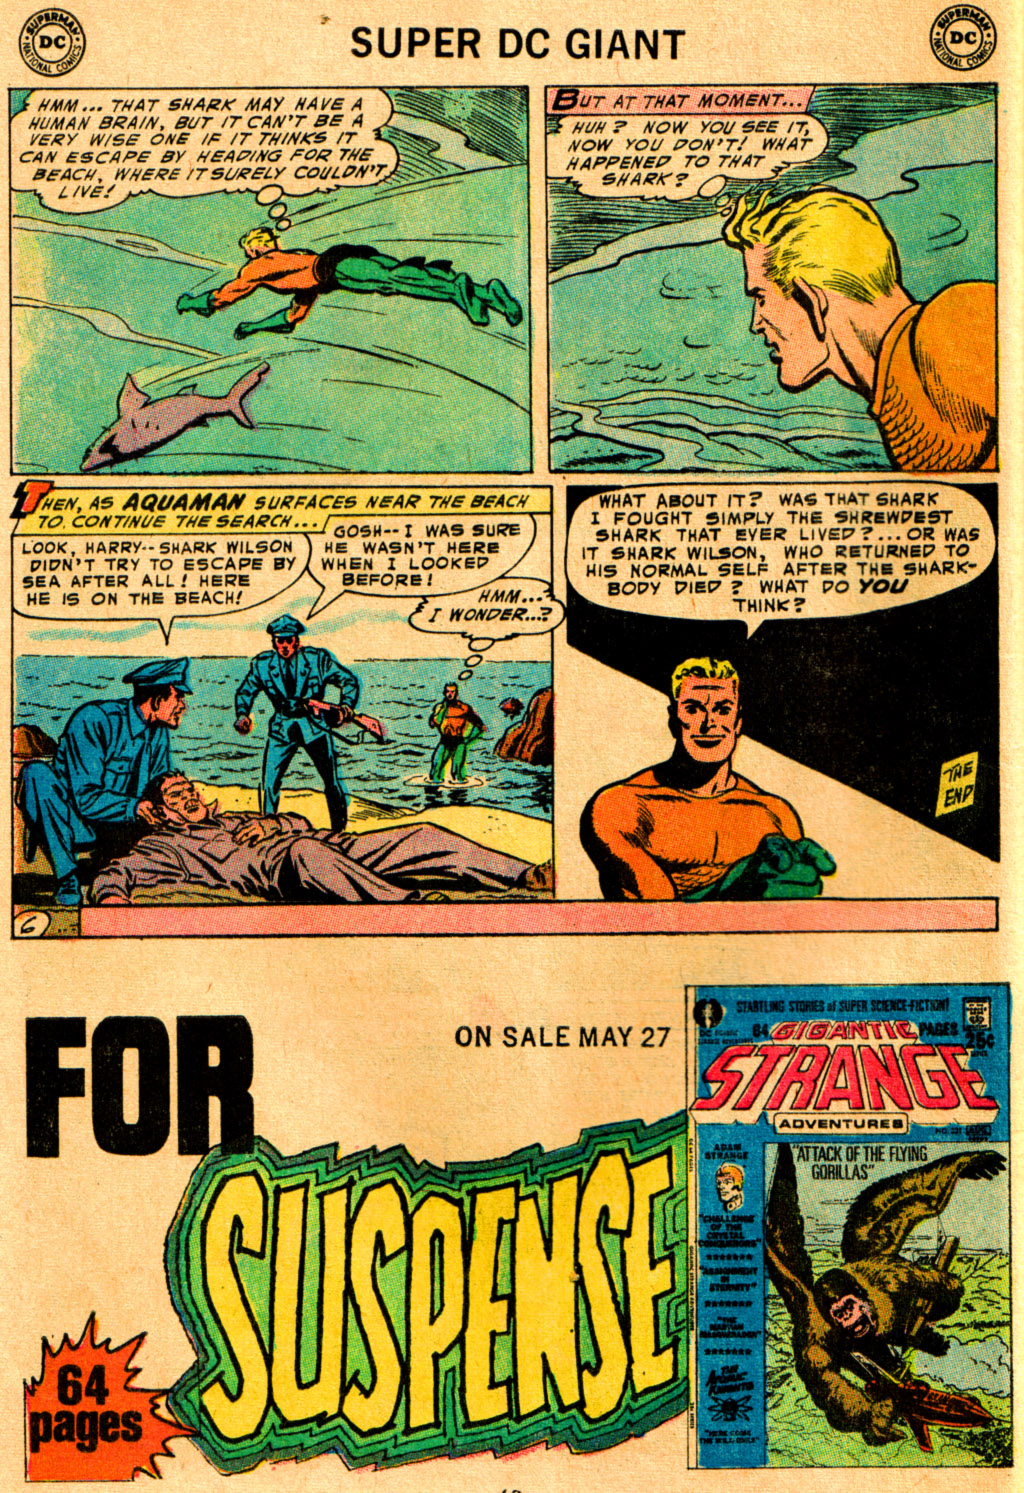 Read online Super DC Giant comic -  Issue #26 - 56